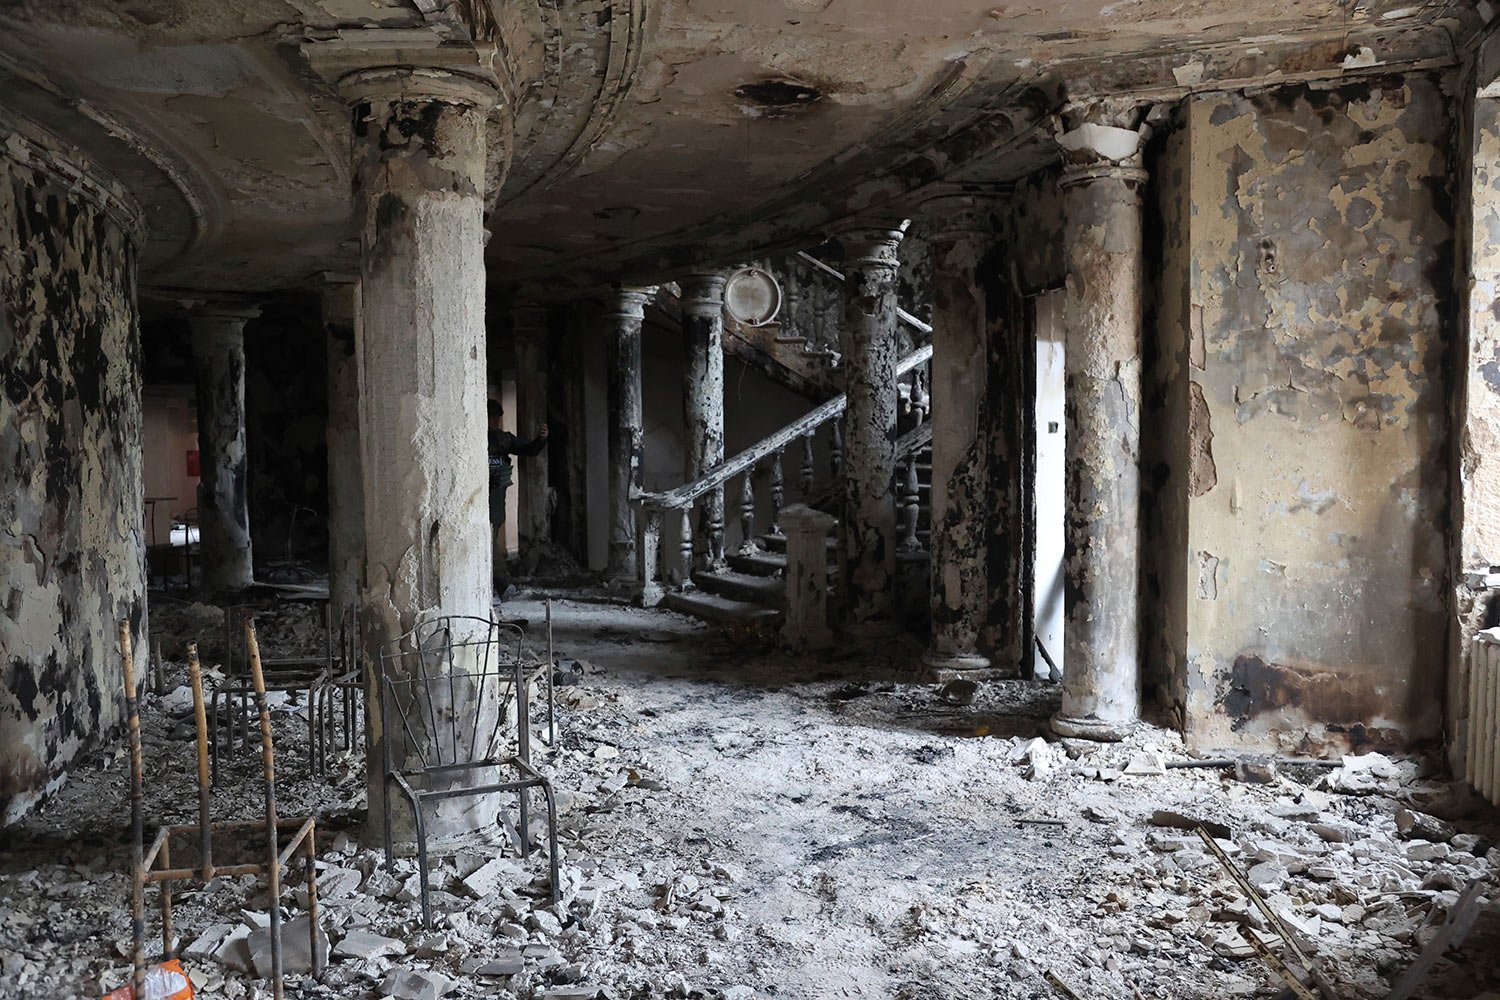  Debris covers the inside of the Mariupol theater damaged during fighting in Mariupol, in territory under the government of the Donetsk People's Republic, eastern Ukraine, Monday, April 4, 2022. (AP Photo/Alexei Alexandrov) 